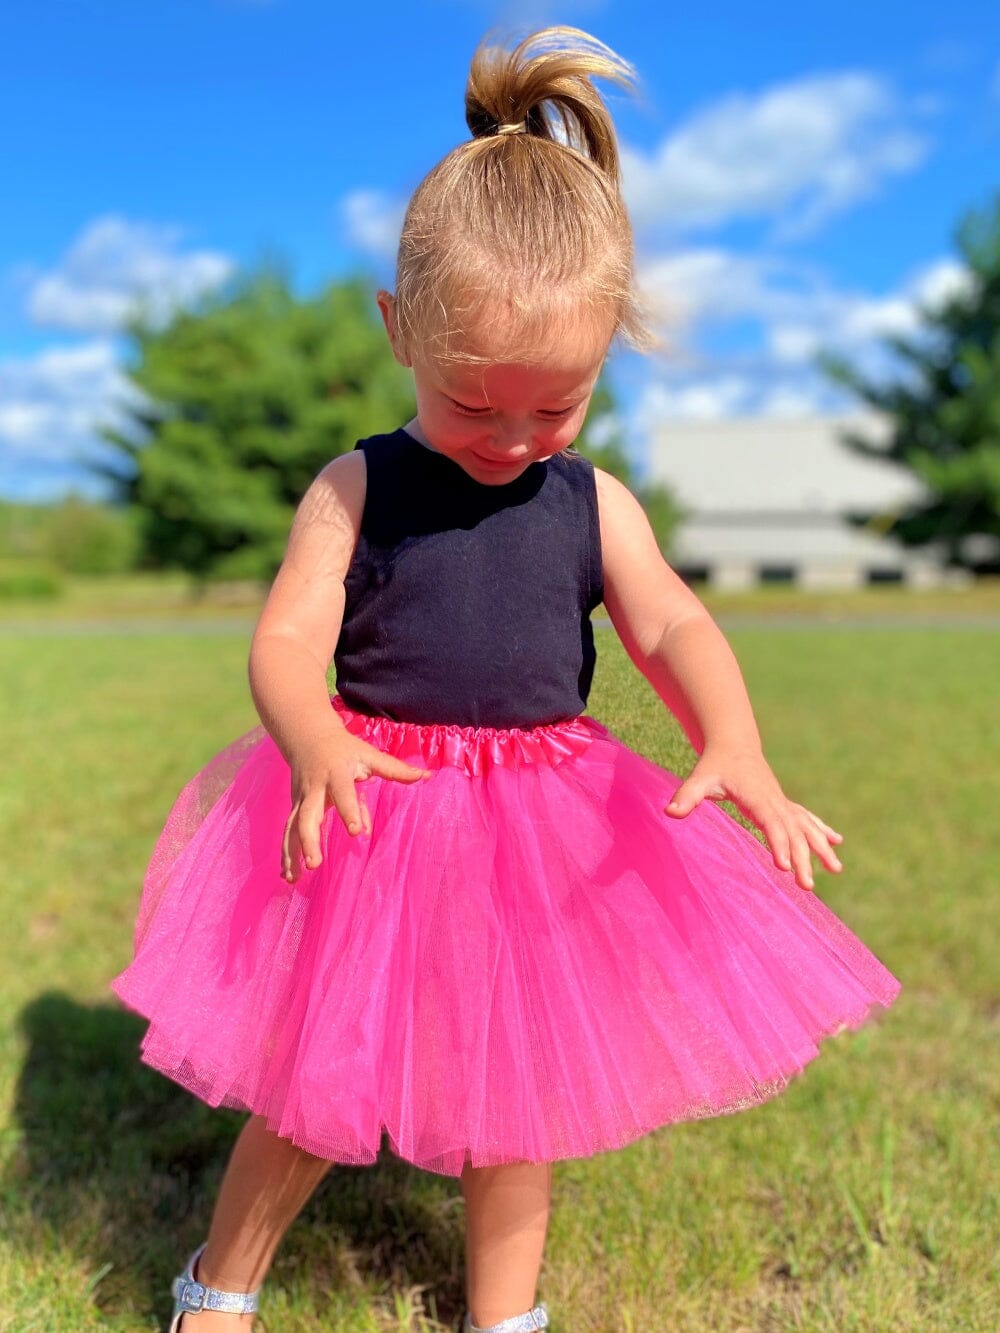 Tutus for Little Girls and Toddlers for Costumes & Dance in Solid Colors